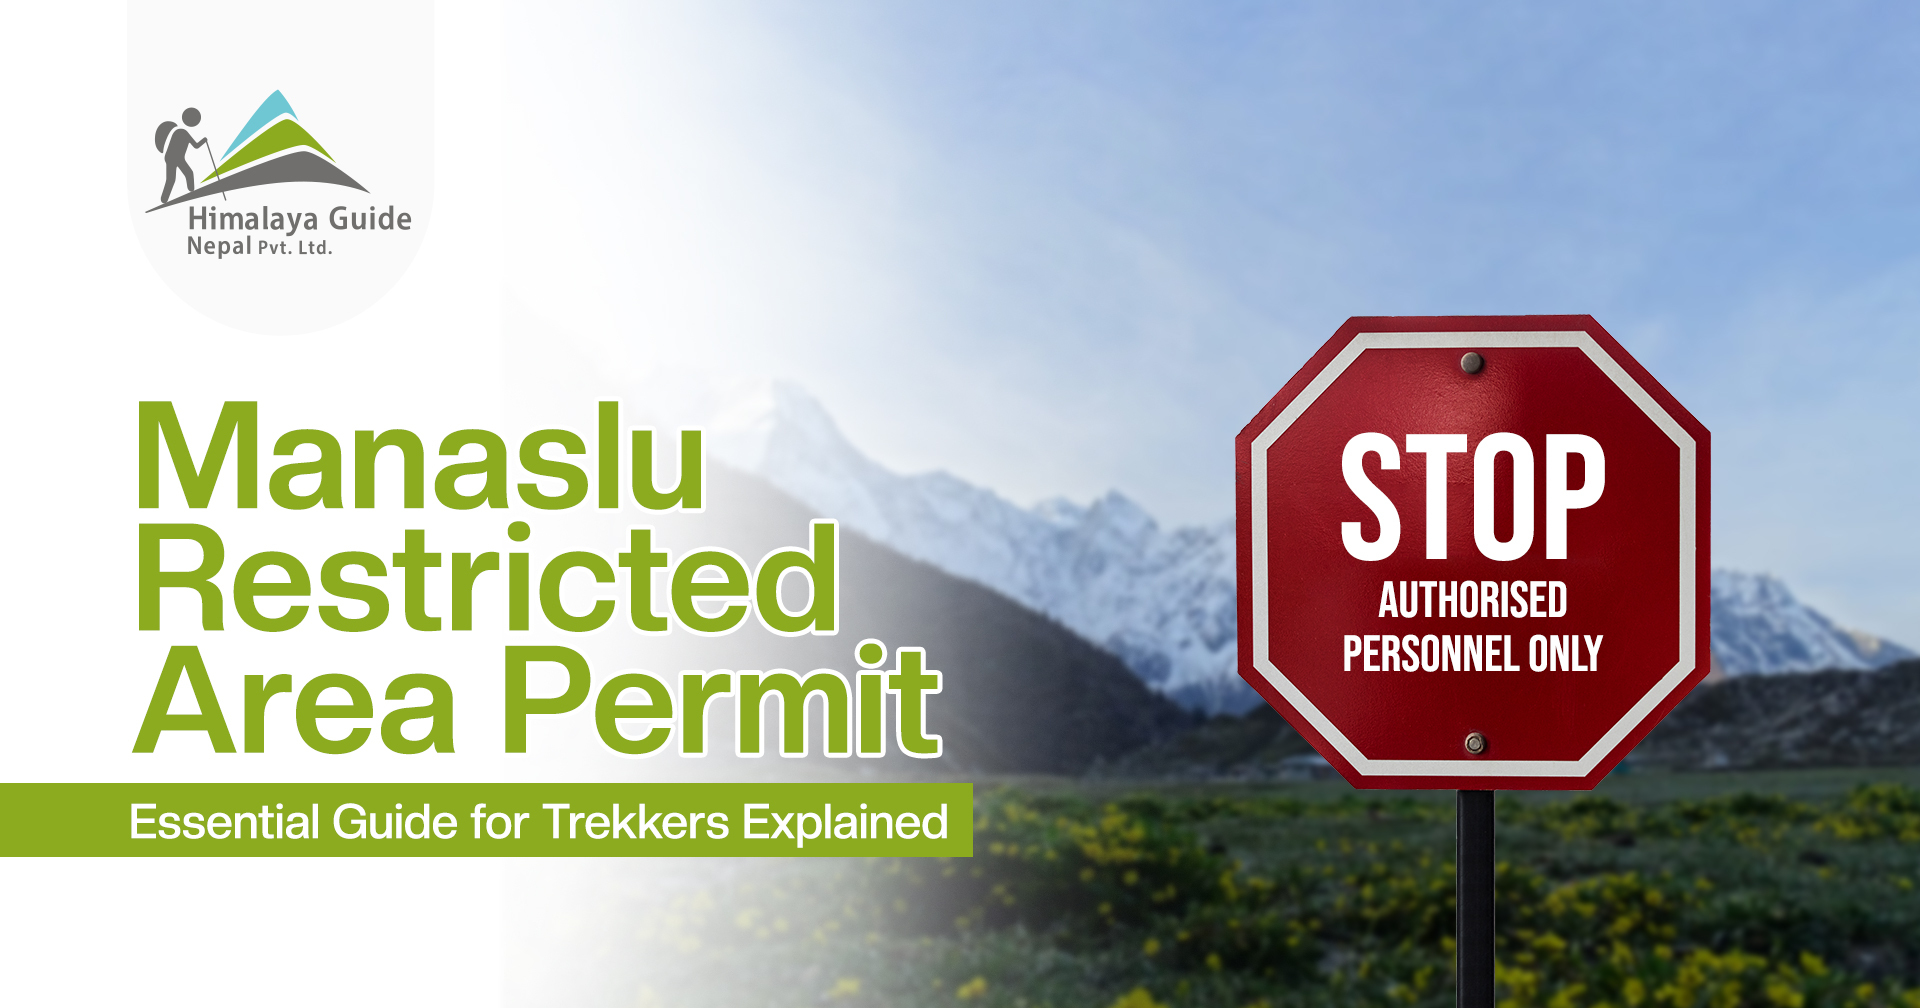 Manaslu Restricted Area Permit: Essential Guide for Trekkers Explained 